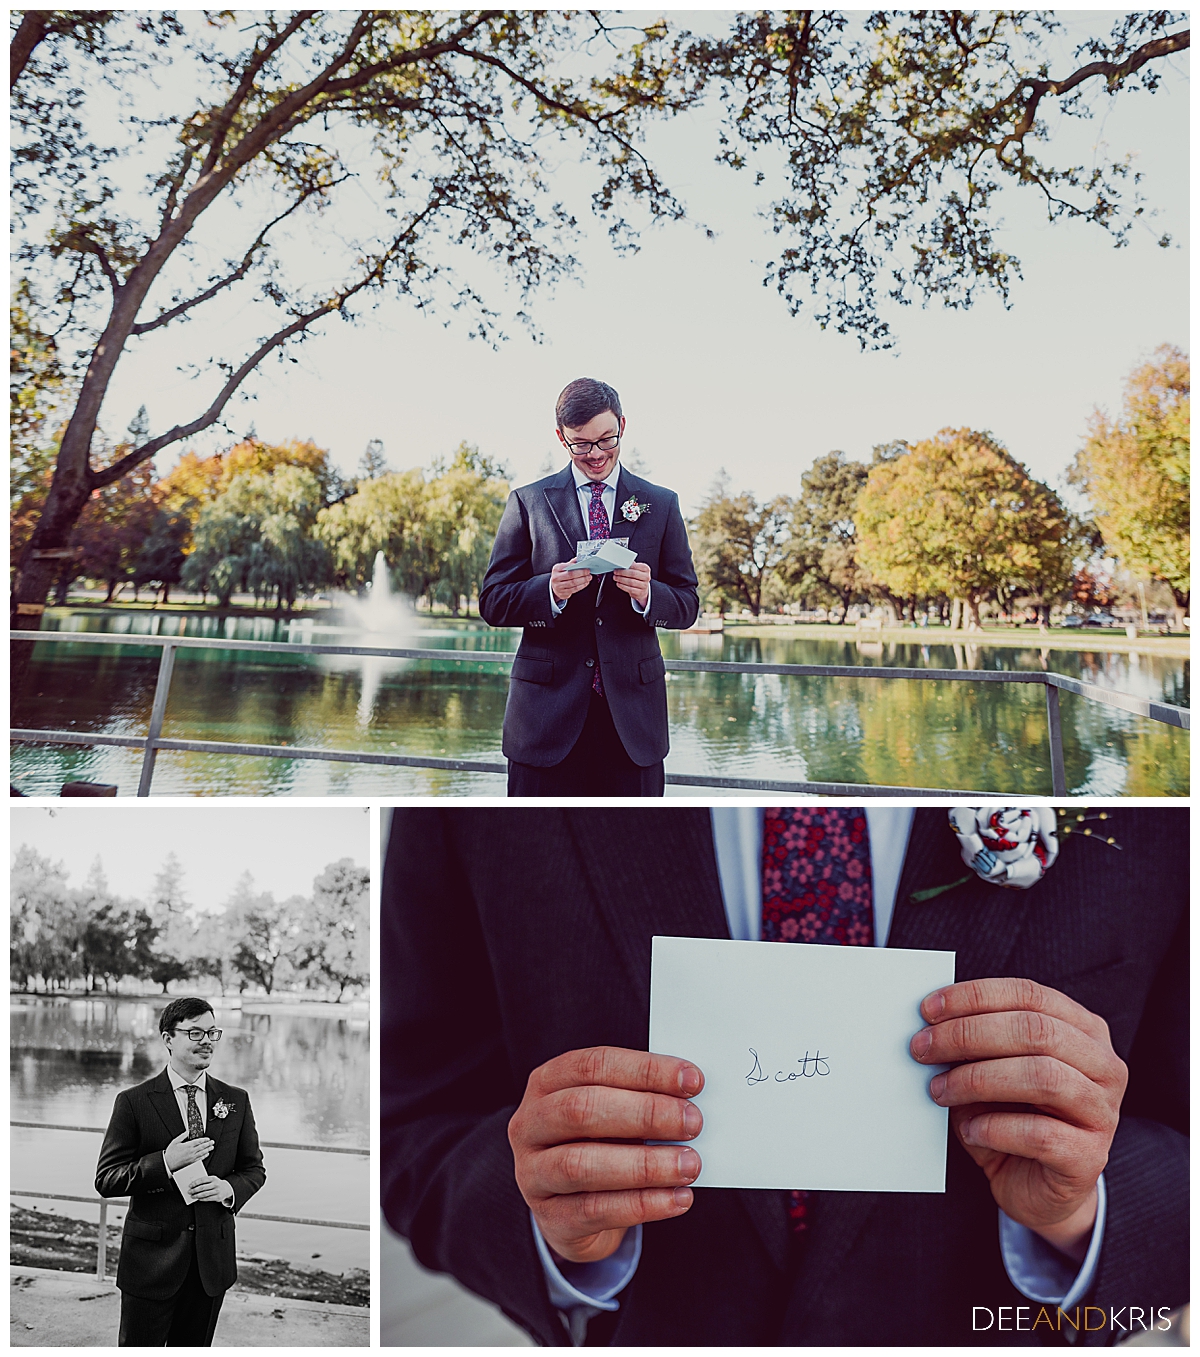 Three images: Top color image of groom reading note from bride smiling. Bottom left black and white image of groom touching his heart after reading note. Bottom right color image of groom holding note from bride.